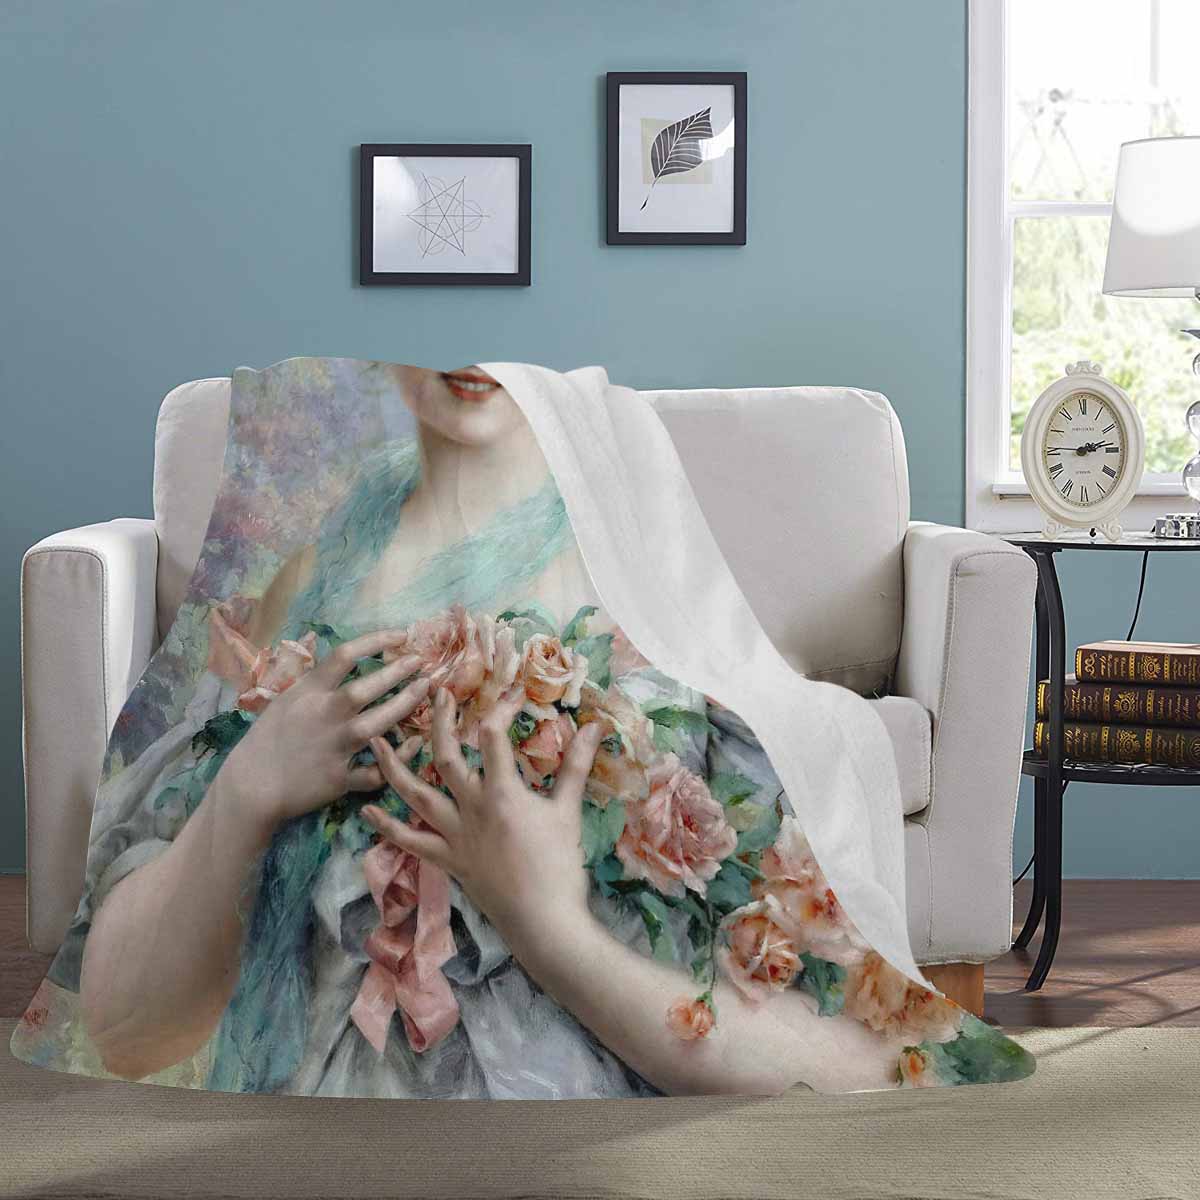 Victorian Lady Design BLANKET, LARGE 60 in x 80 in, The Rose Girl